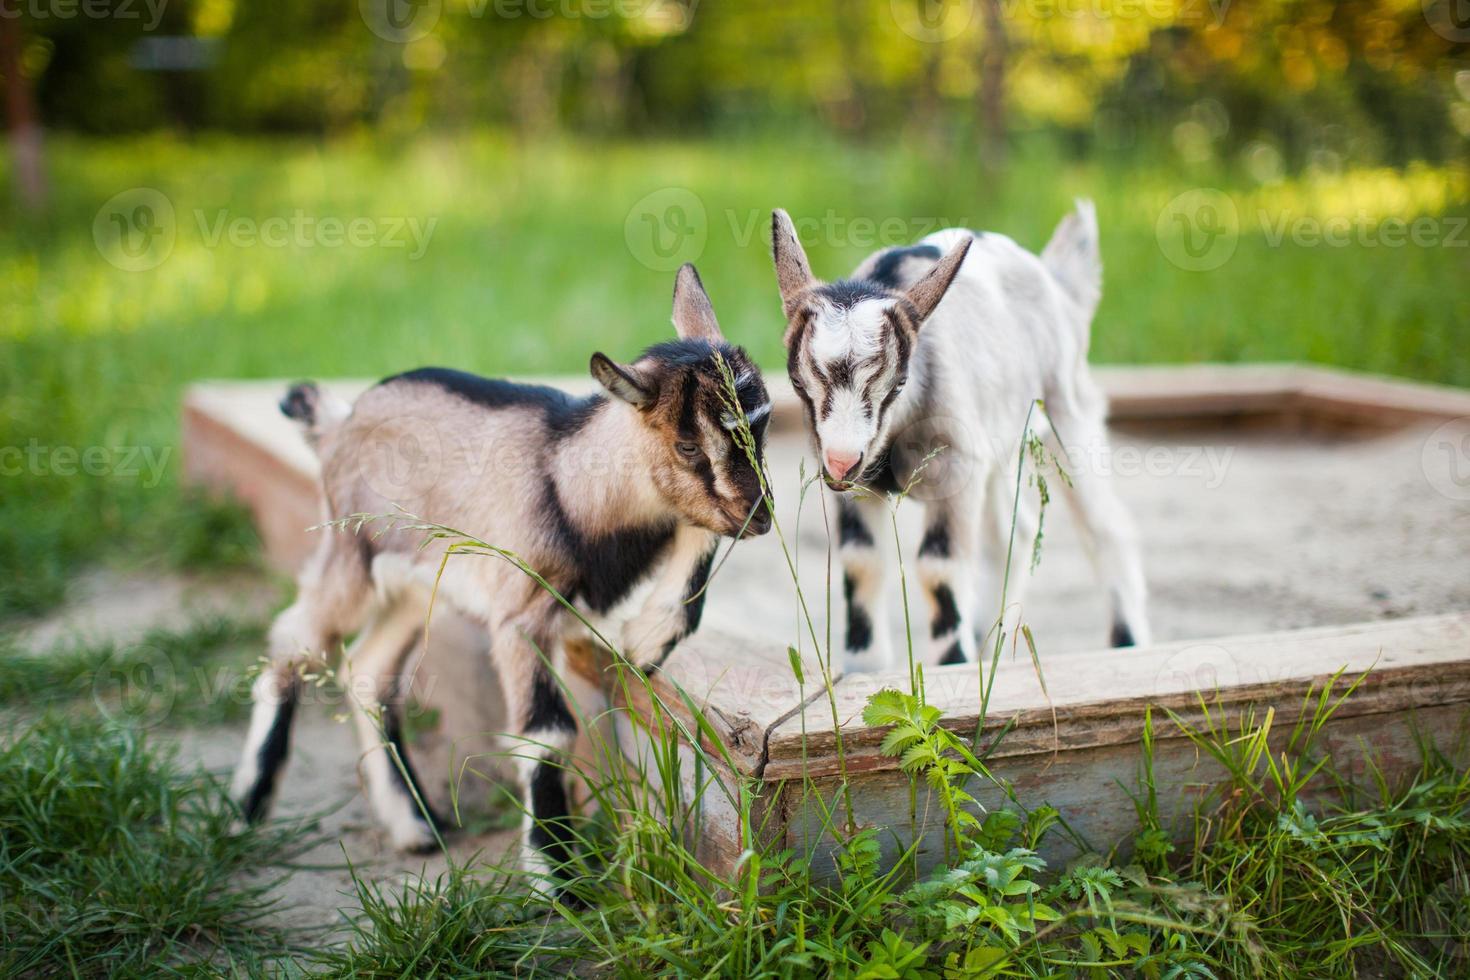 A beautiful photo of two little goats playing